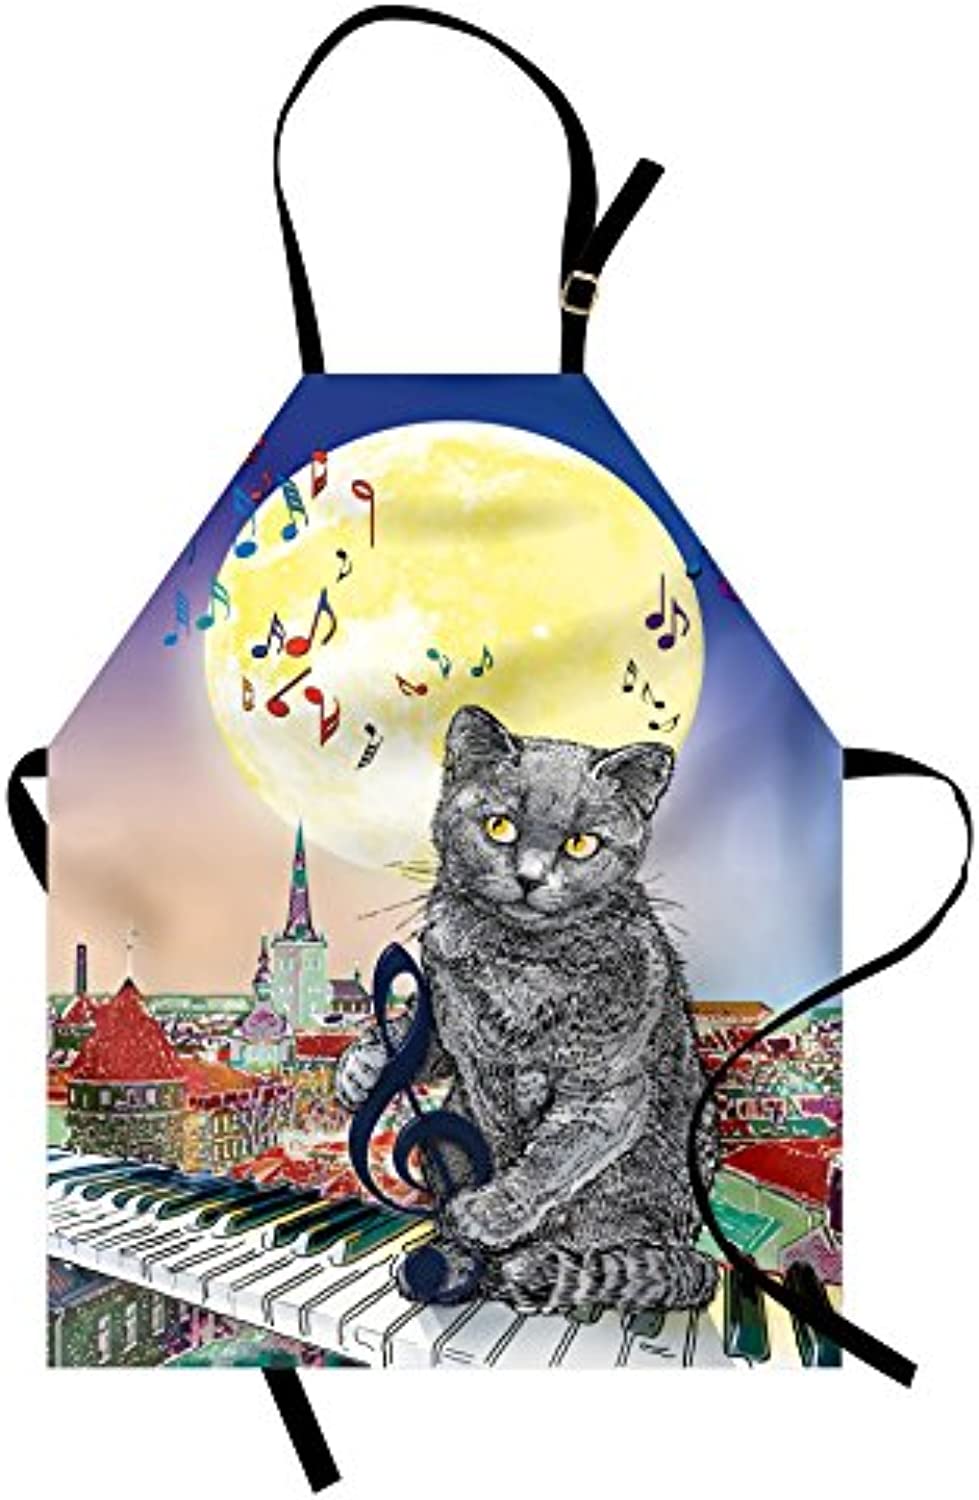 Granbey City Apron  Musical Notes Cat the Keyboard on Rooftops in Night Sky Old Town Full Moon Art Print  Unisex Kitchen Bib with Adjustable Neck for Cooking Gardening  Adult Size  Cream Grey